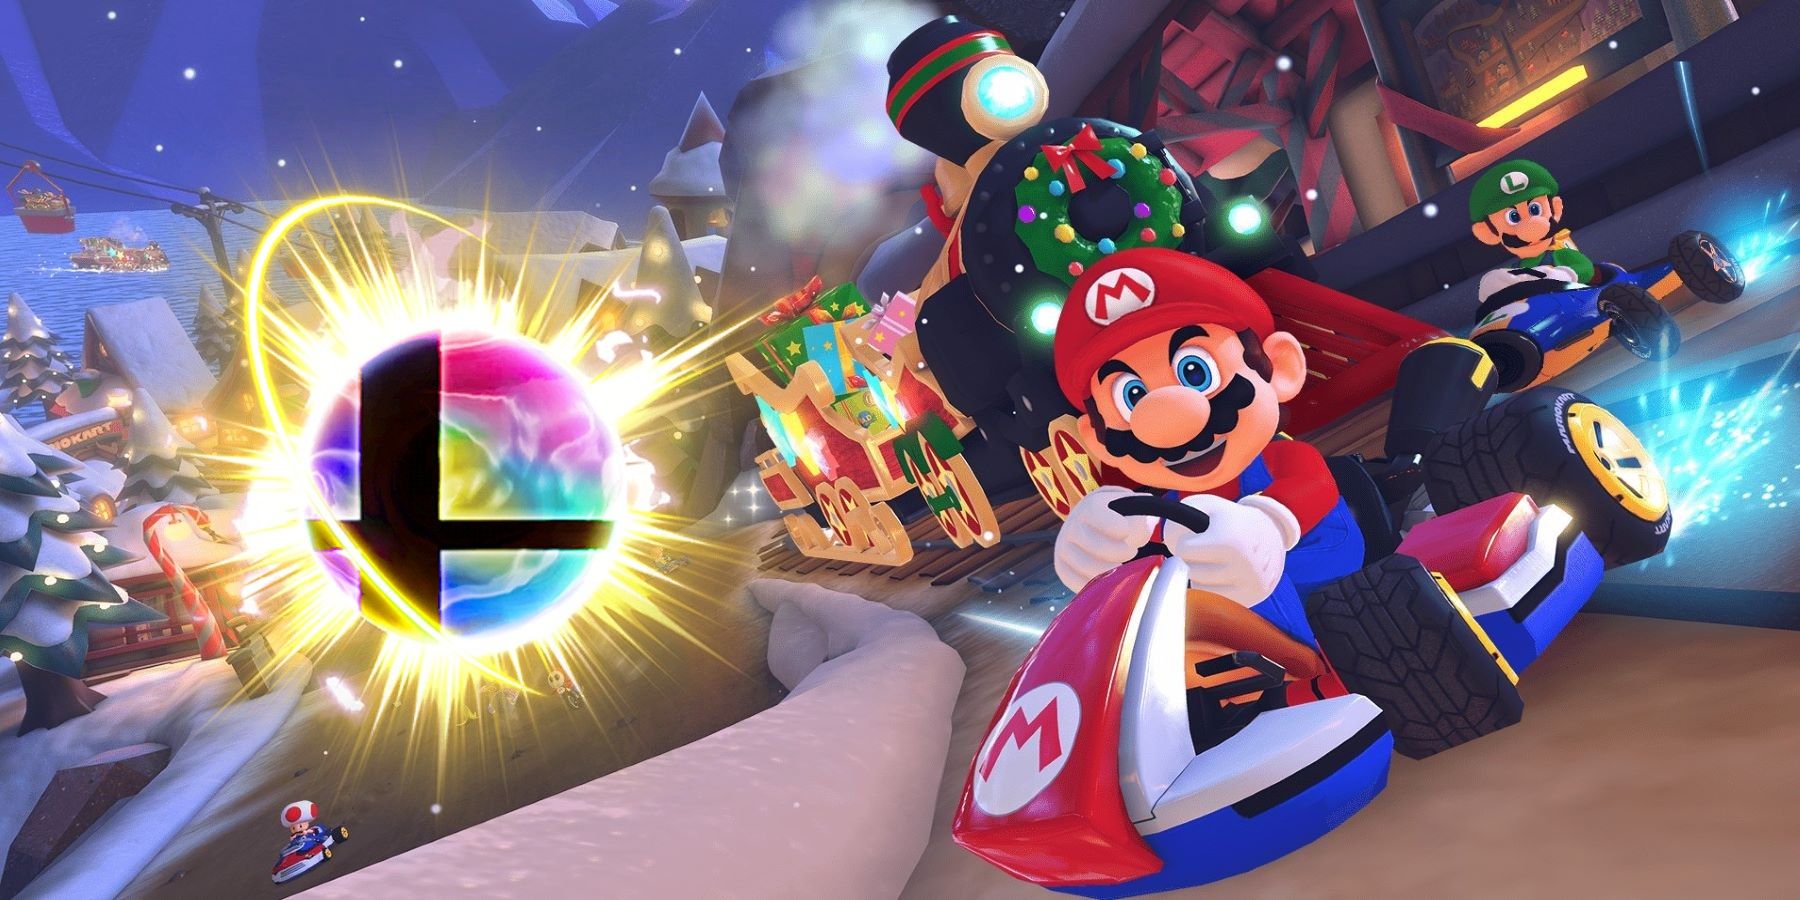 Mario Kart 6 Deluxe Booster Course Pass DLC footage with a Super Smash Bros Ultimate Final Smash Ball